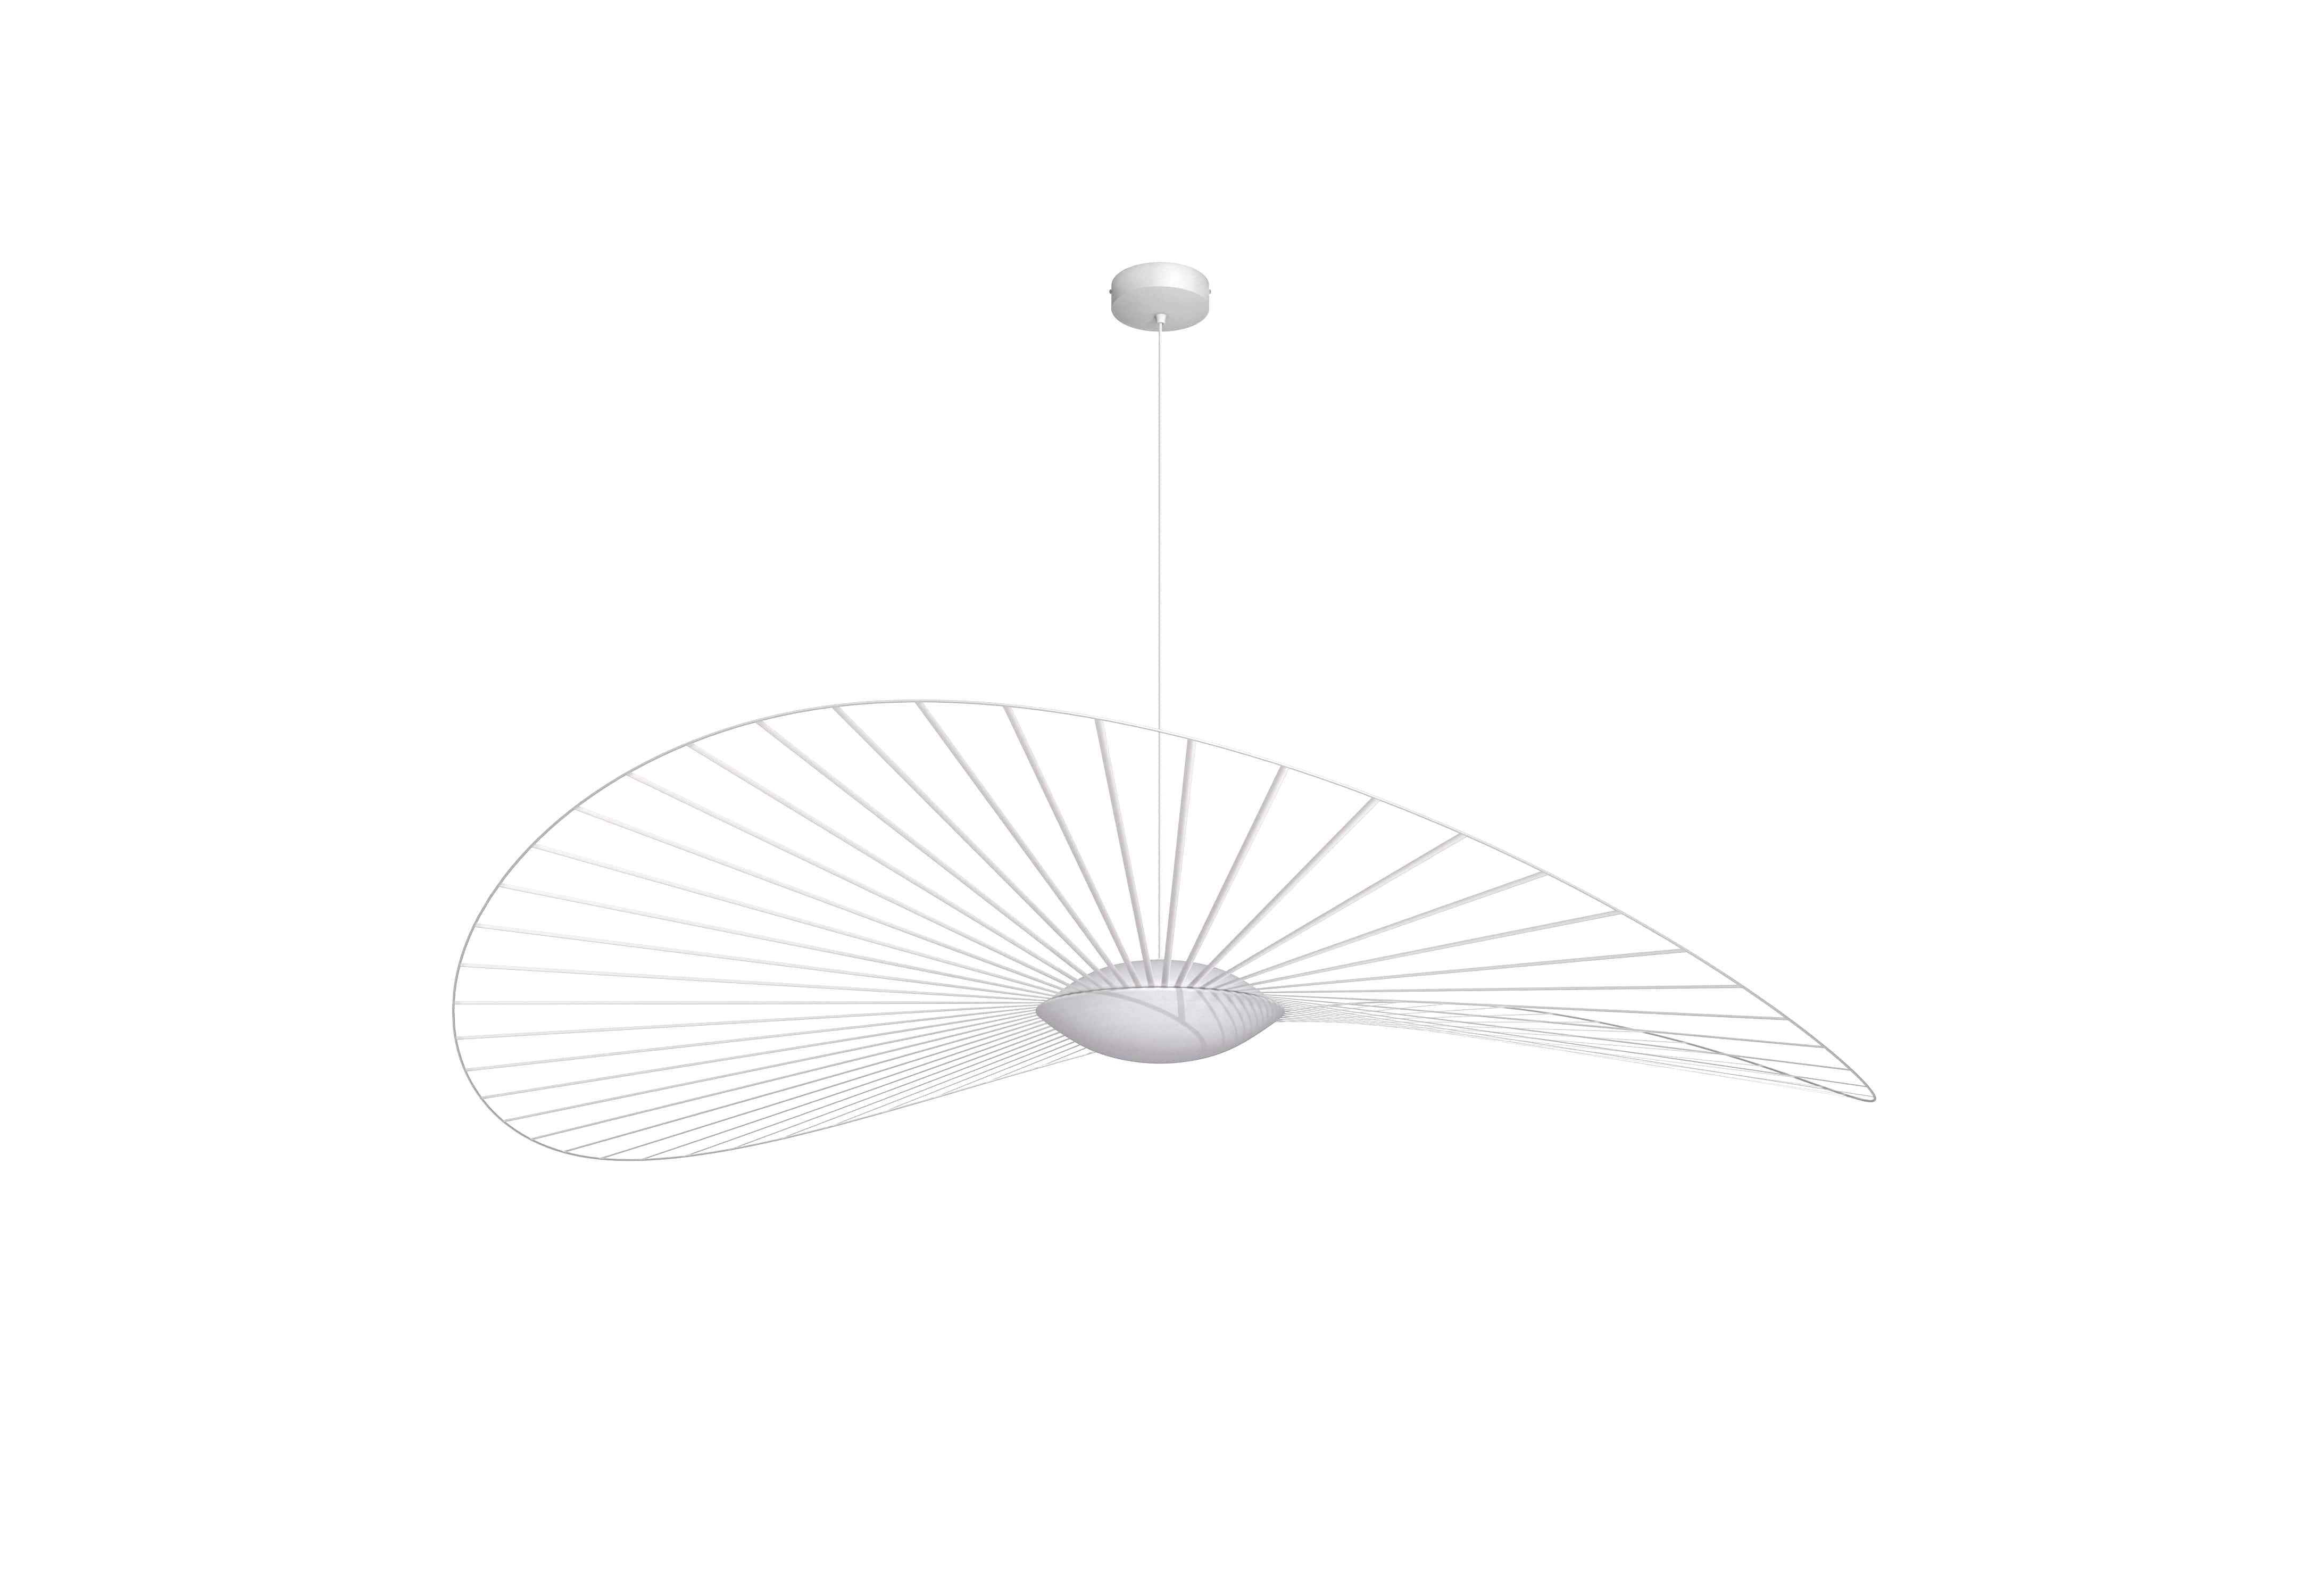 Petite Friture Large Vertigo Nova Pendant Light in White by Constance Guisset, 2020

Vertigo Nova is a highly technical collection that doesn't compromise on the design's iconic poetic elegance. A line that comes in black or white, for two subtly